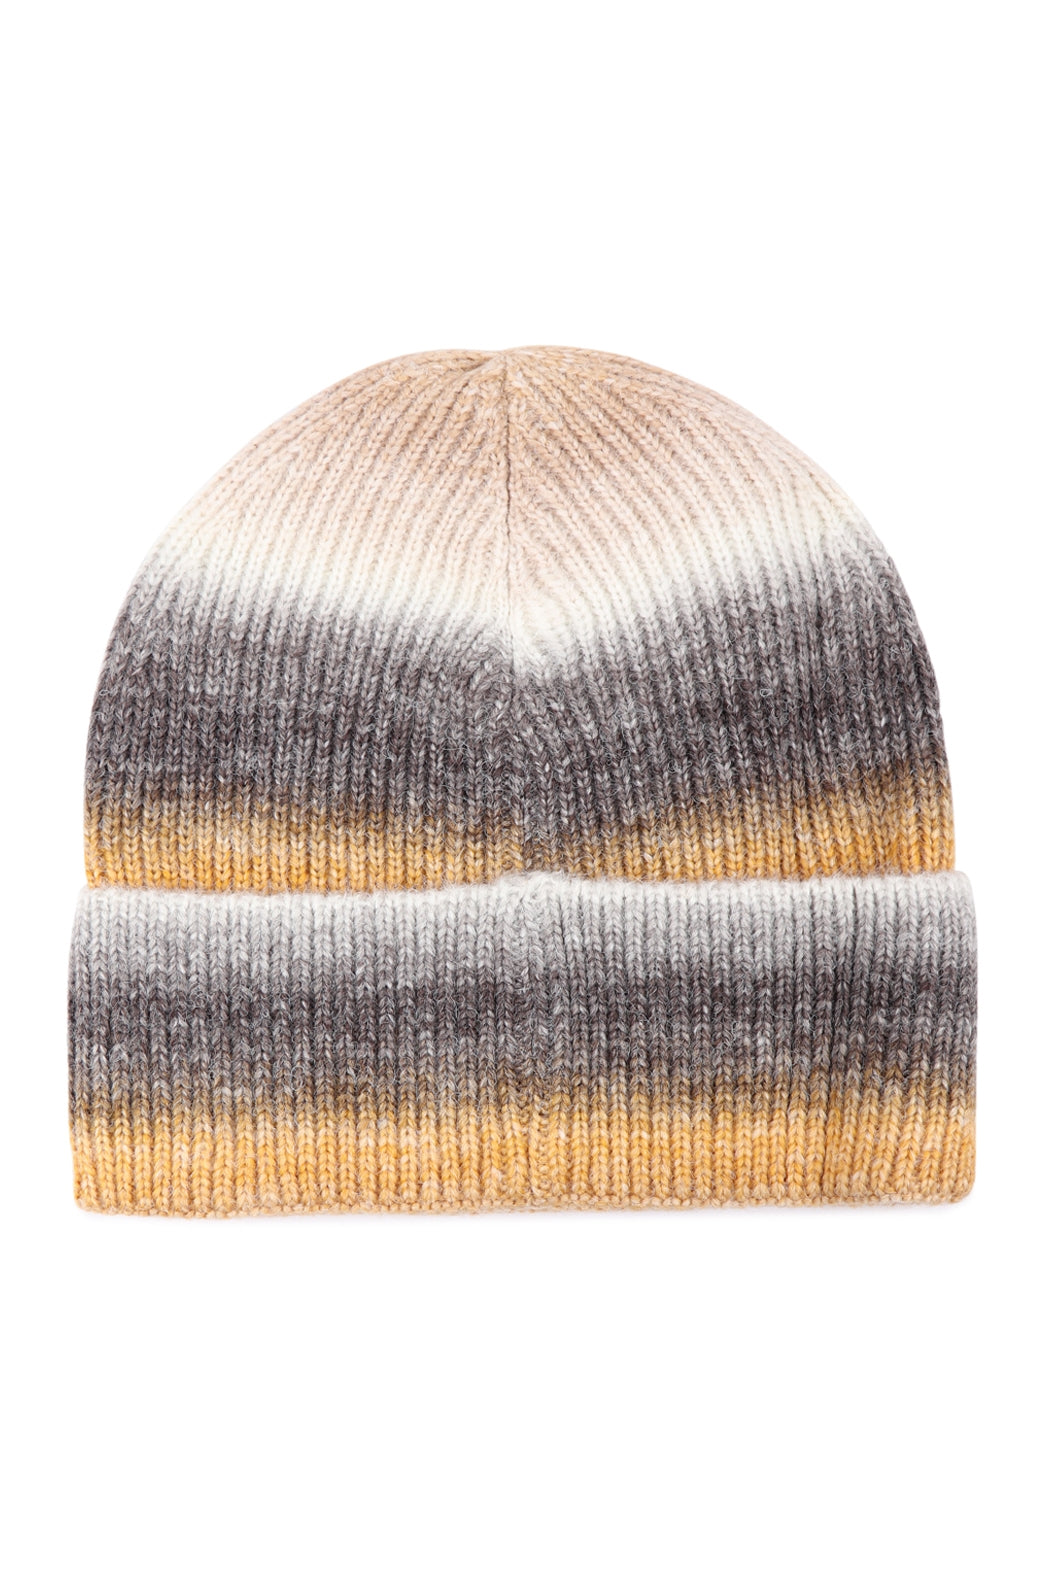 STRIPED KNITTED BEANIE/6PCS (NOW $2.50 ONLY!)